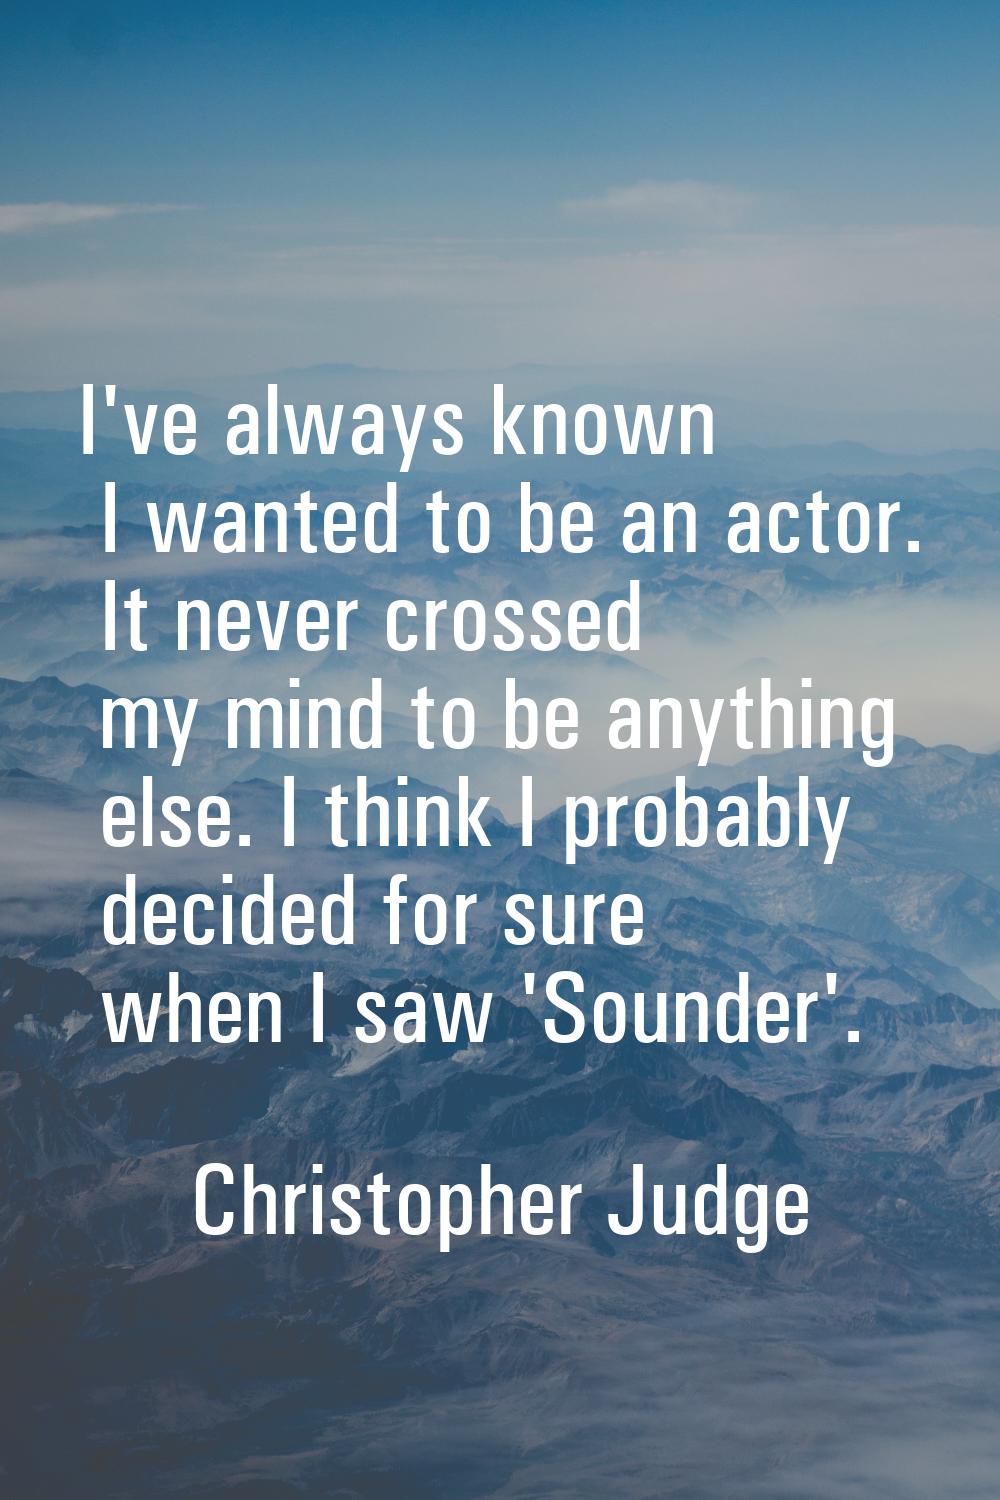 I've always known I wanted to be an actor. It never crossed my mind to be anything else. I think I 